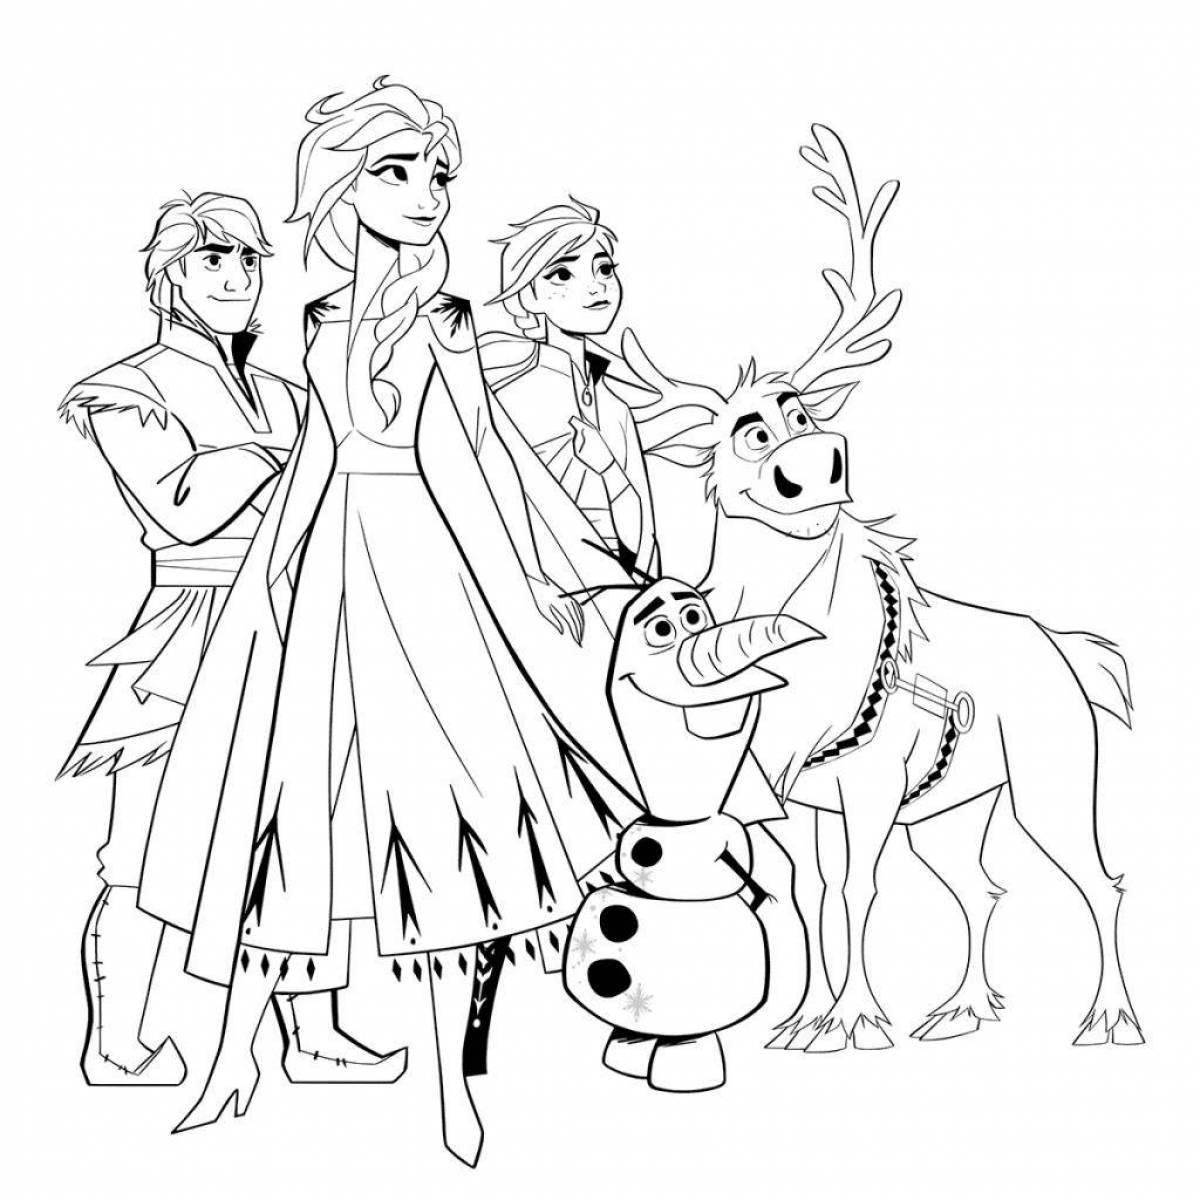 Elsa and olaf exquisite coloring book